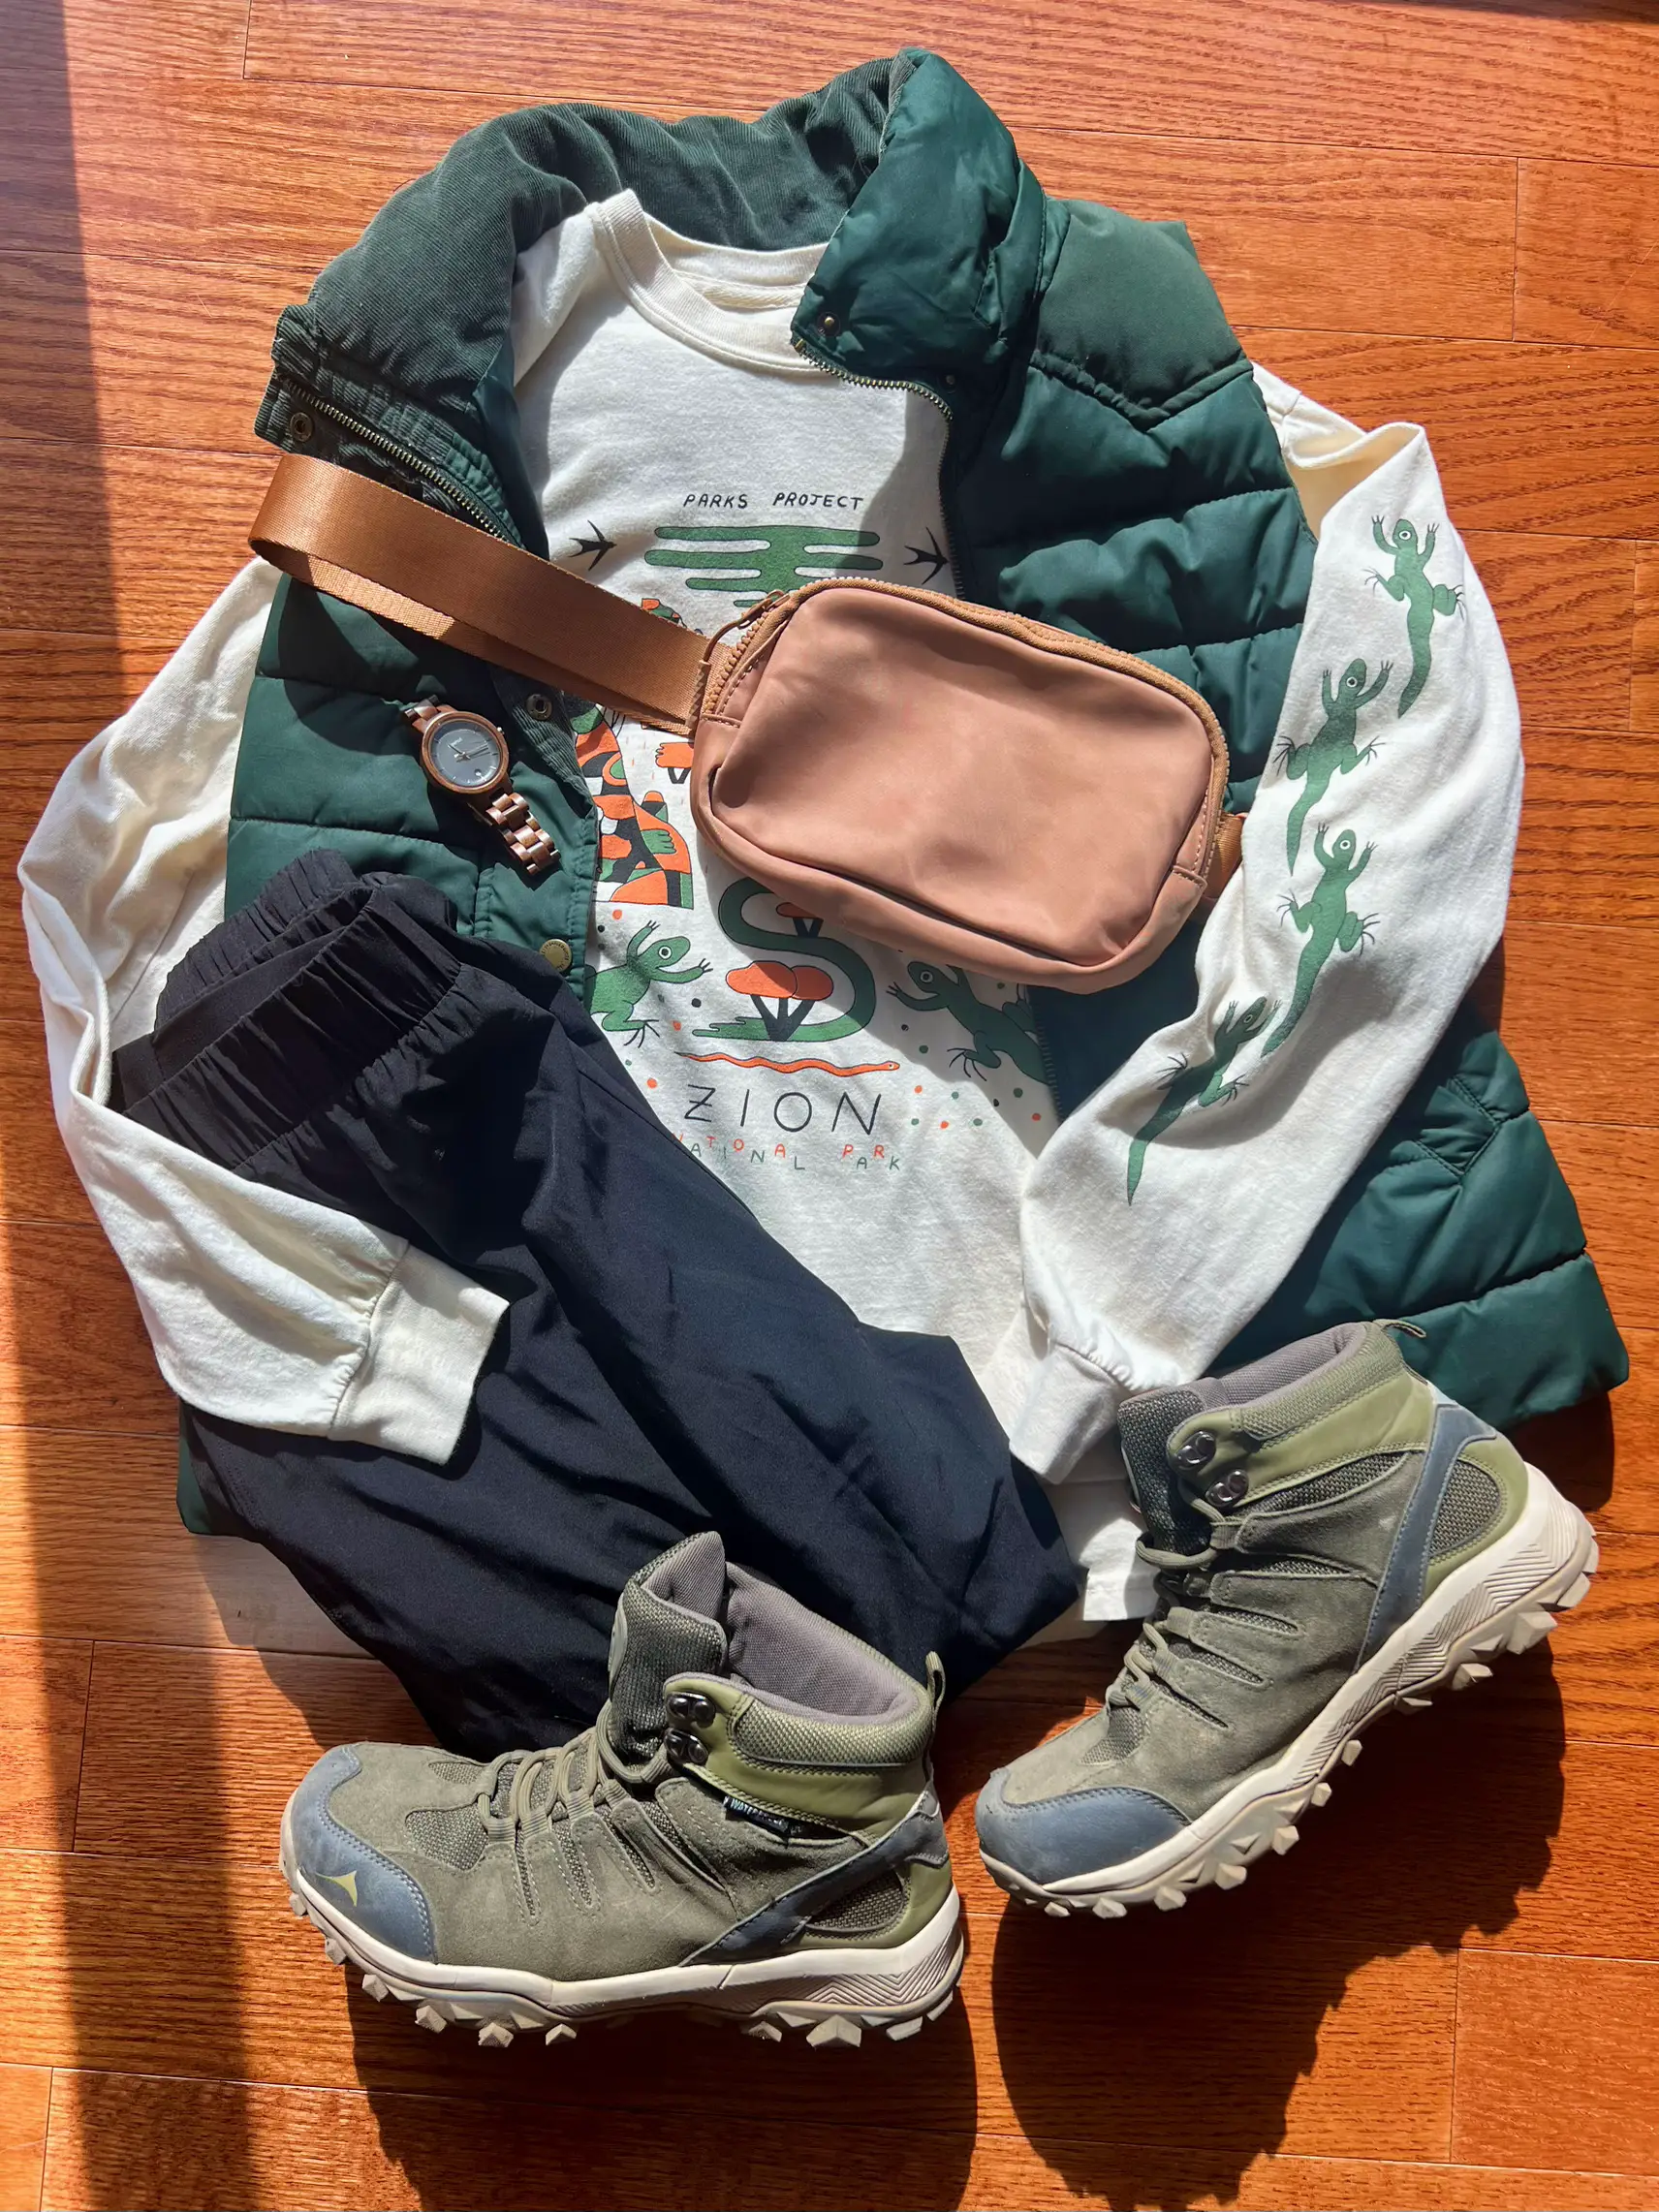 Granola Girl Aesthetic And Outfit Essentials For Hiking - Brit + Co